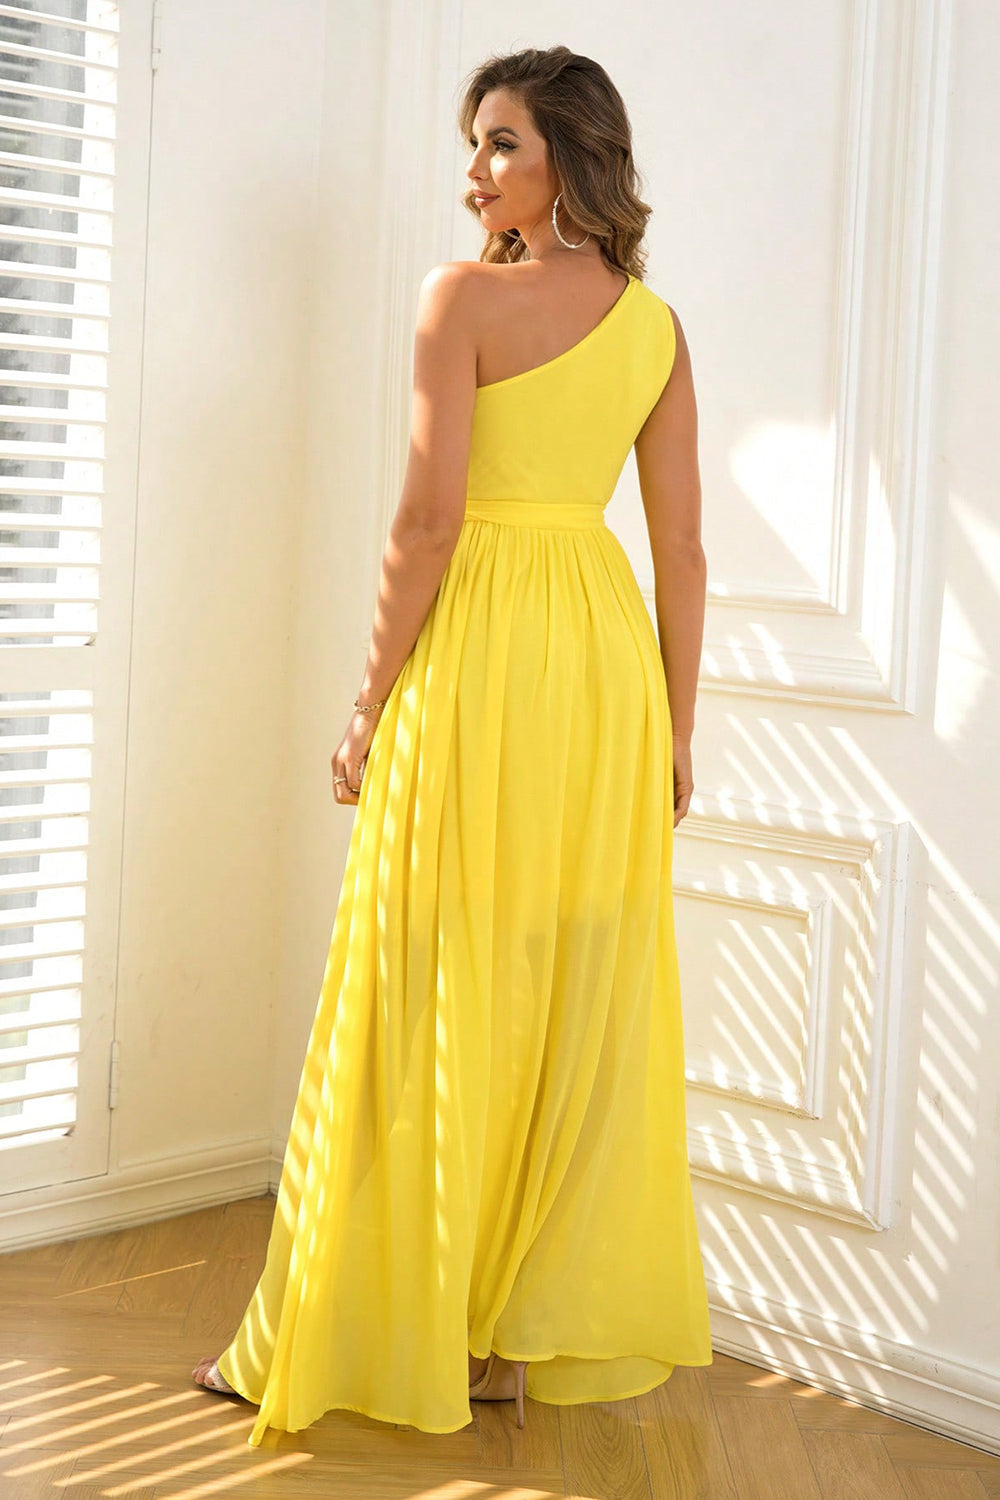 Bright yellow dress with an asymmetric neckline and a long, airy skirt